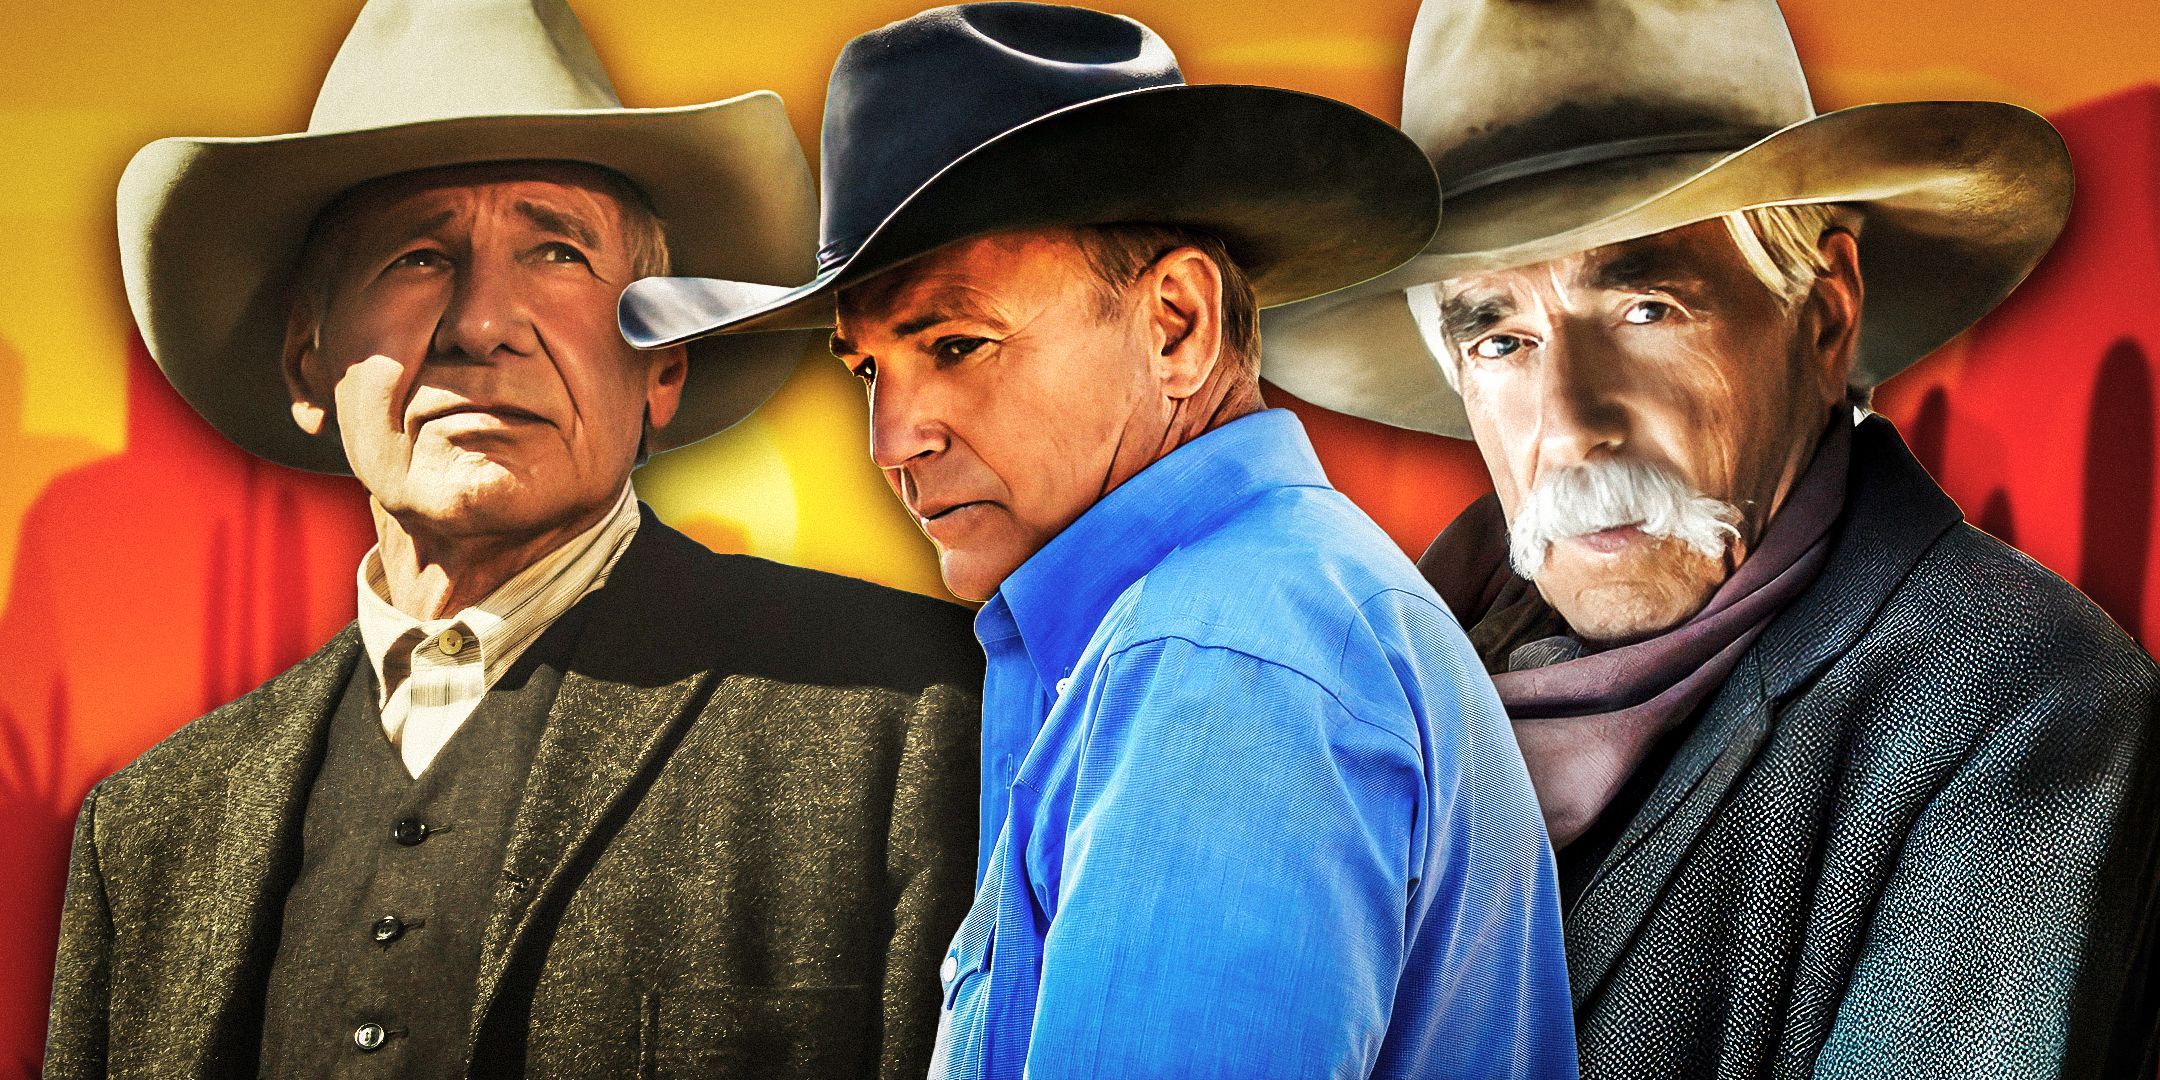 (Harrison Ford as Jacob Dutton) from 1923, (Sam Elliott as Shea Brennan) from 1883 and (Kevin Costner as John Dutton) from Yellowstone